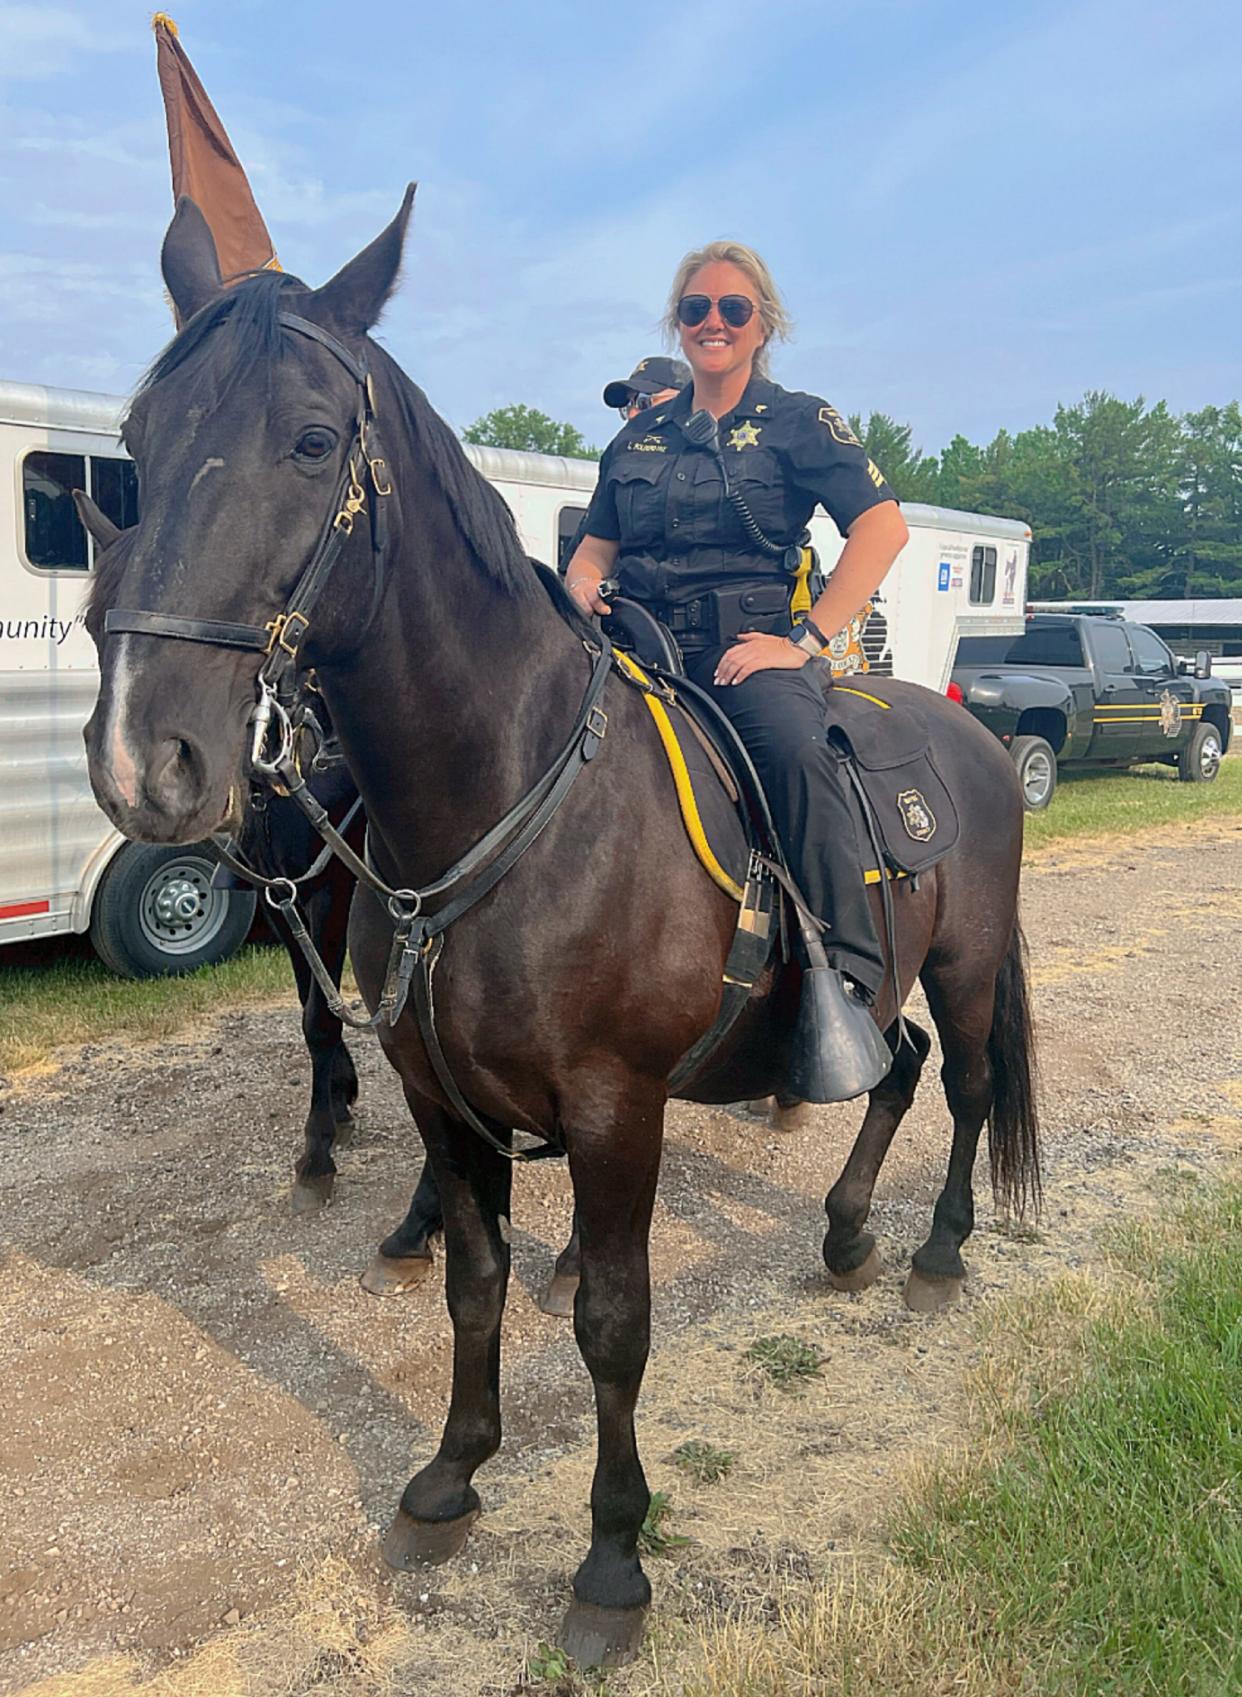 Sgt. Lacey Polderdyke, of the Internal Affairs Section Honor Guard Mounted Unit for Wayne County Sheriff's Office, on the horse she rides, Hogan, at the Midwest Invitational Black Rodeo on June 10, 2023, in Belleville. Polderdyke pushed for service horses to be included for interment at the Michigan War Dog Memorial cemetery in Lyon Township.